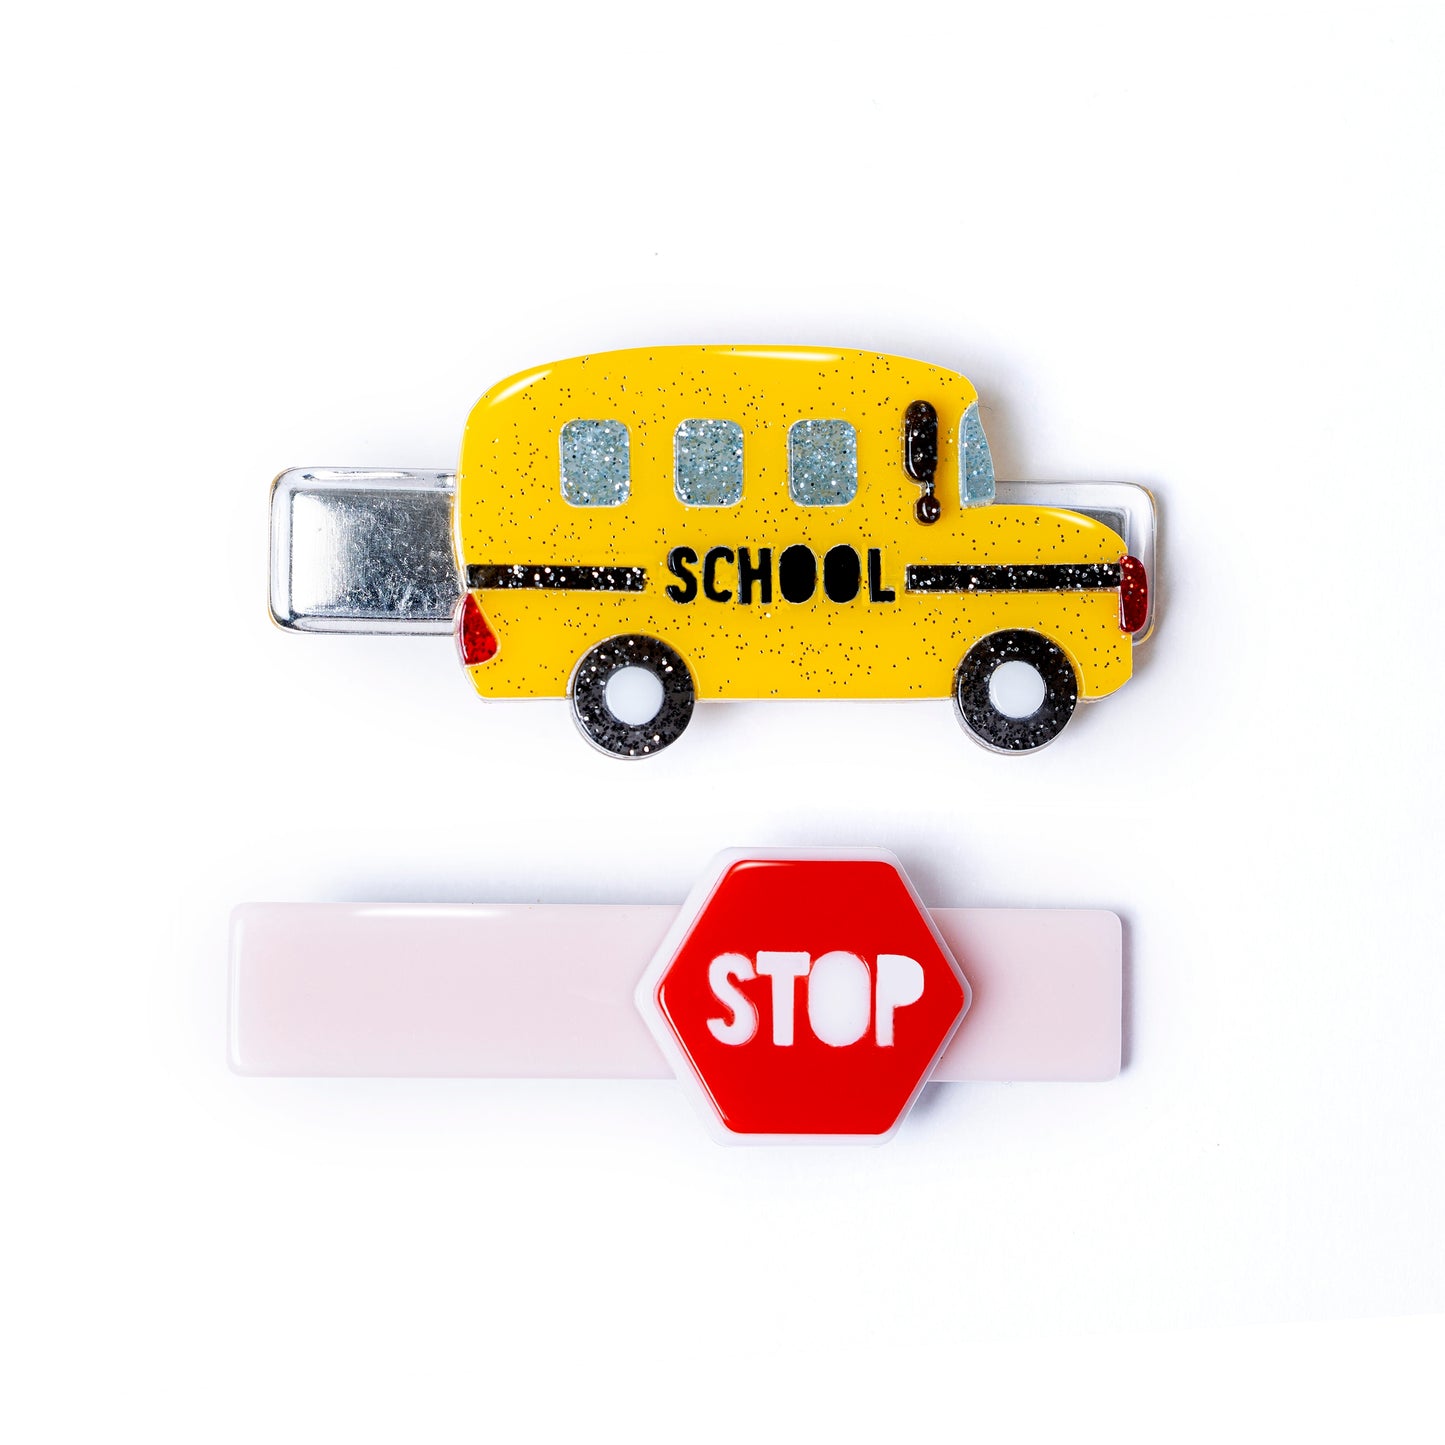 Lilies & Roses School Bus & Stop Sign Clips